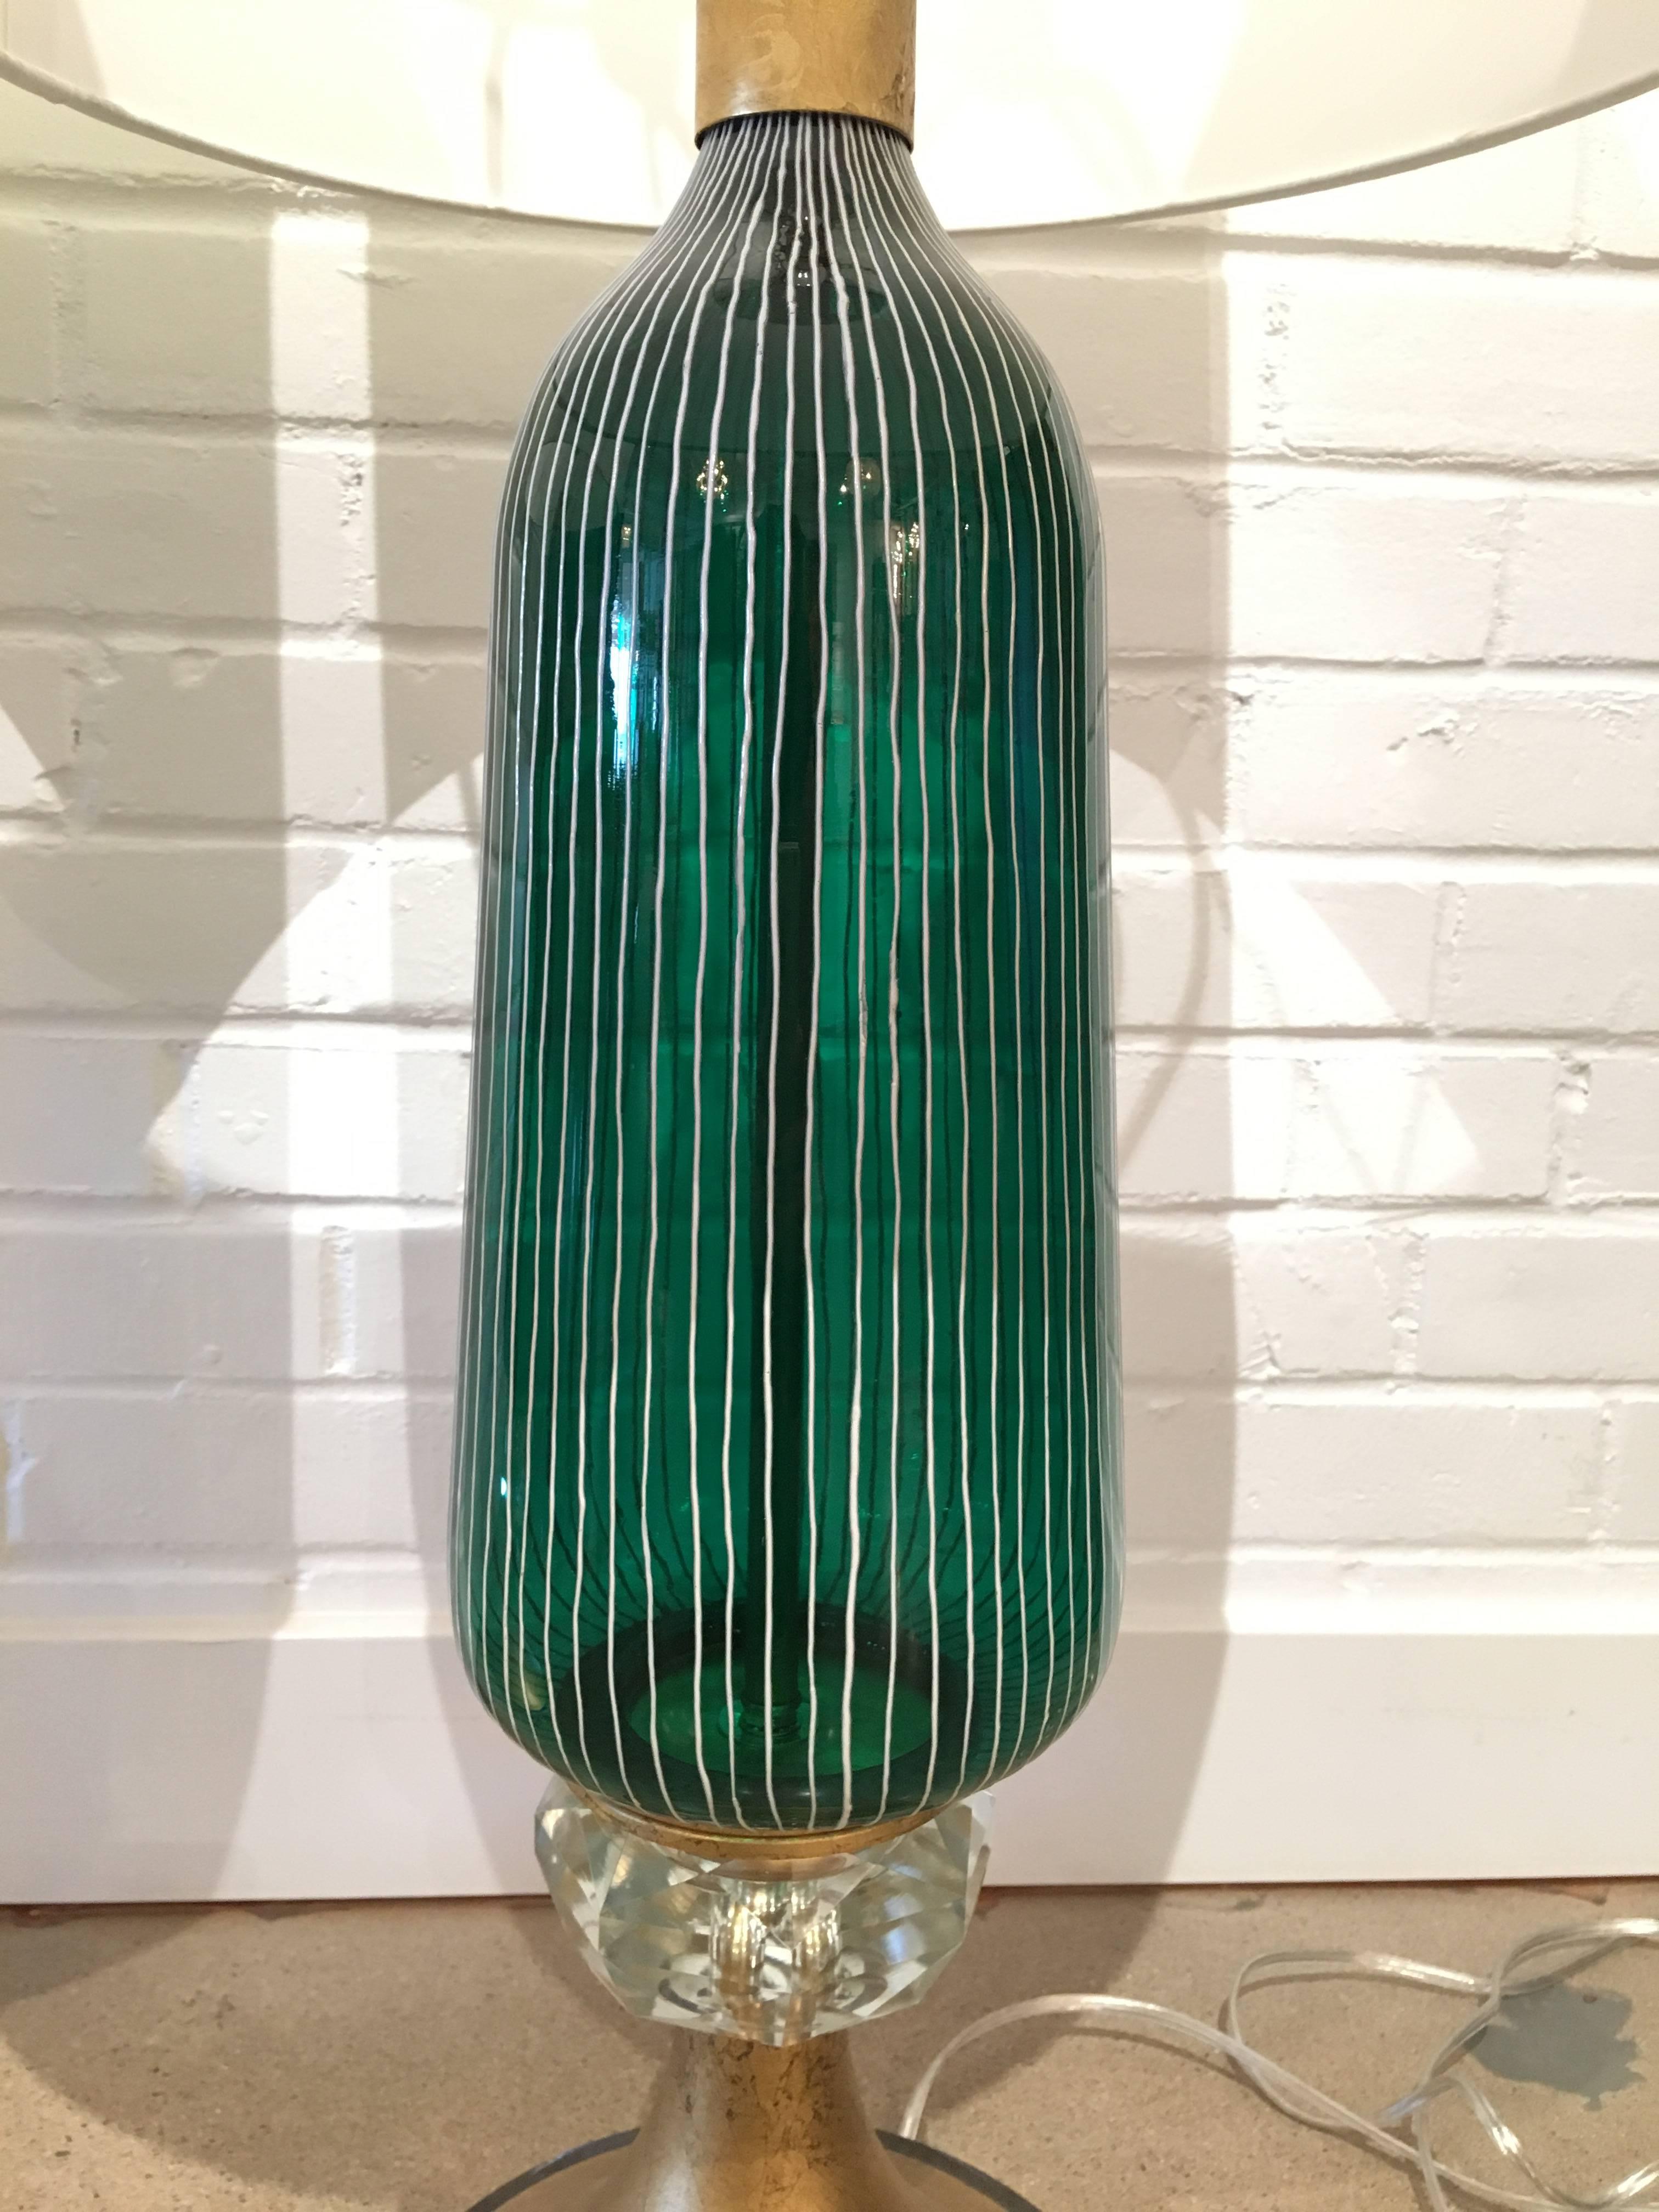 This pair of contemporary lamps made using vintage green striped with white vintage Murano glass lamp pieces are a wow! All new electrical, shades and finials.